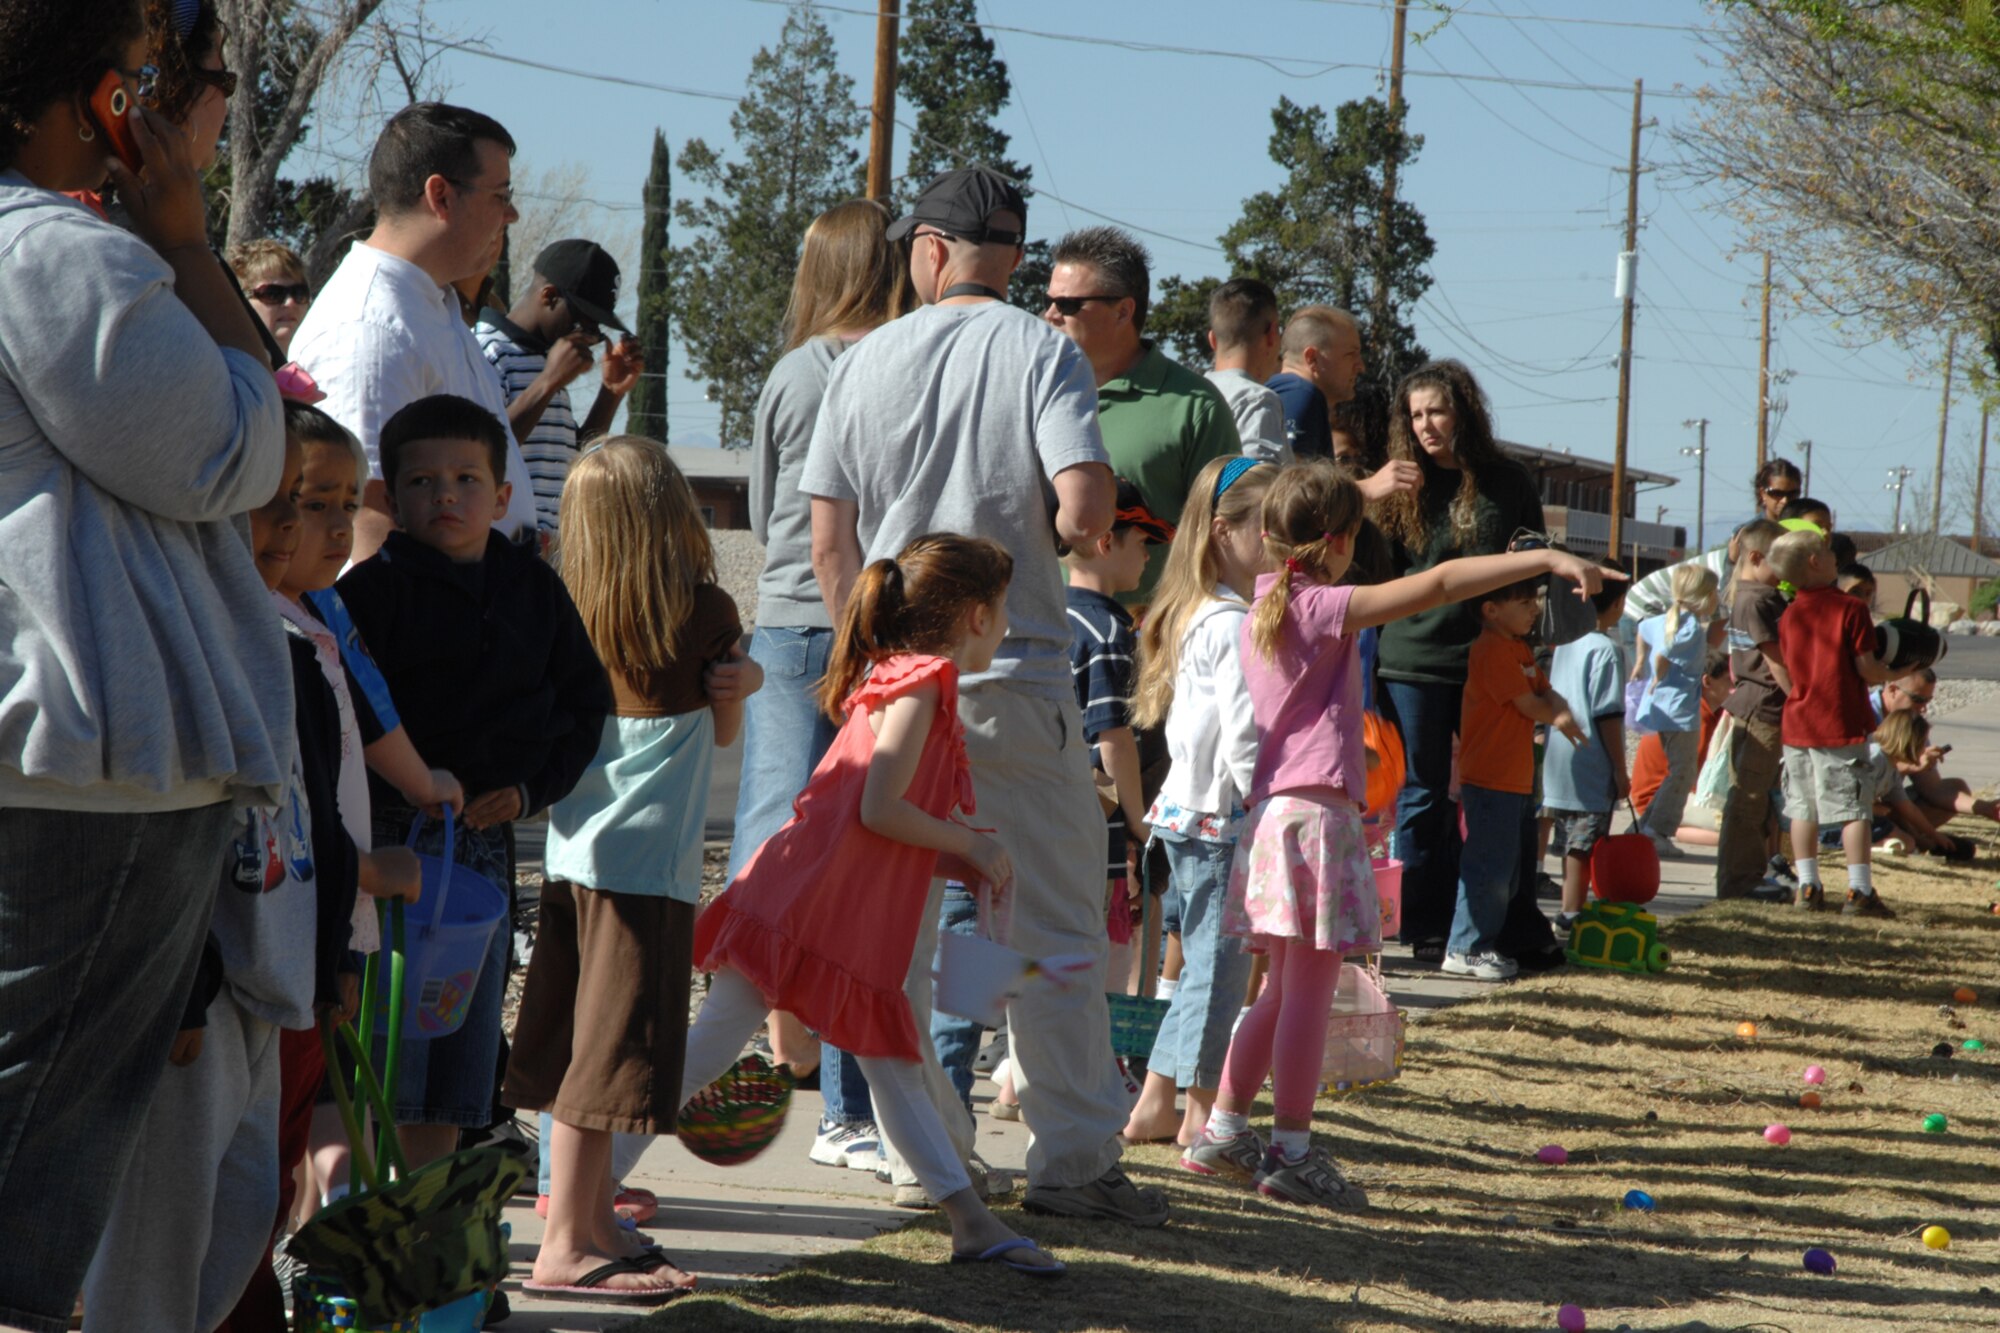 Parents and children await the official start of the Base Wide Easter Egg Hunt March 22 at Holloman Air Force Base, N.M. The event hosted more than 800 children and 1,500 parents and grandparents. Thirty-eight volunteers assisted with the event's set up. (U.S. Air Force photo/Airman 1st Class Jamal D. Sutter)